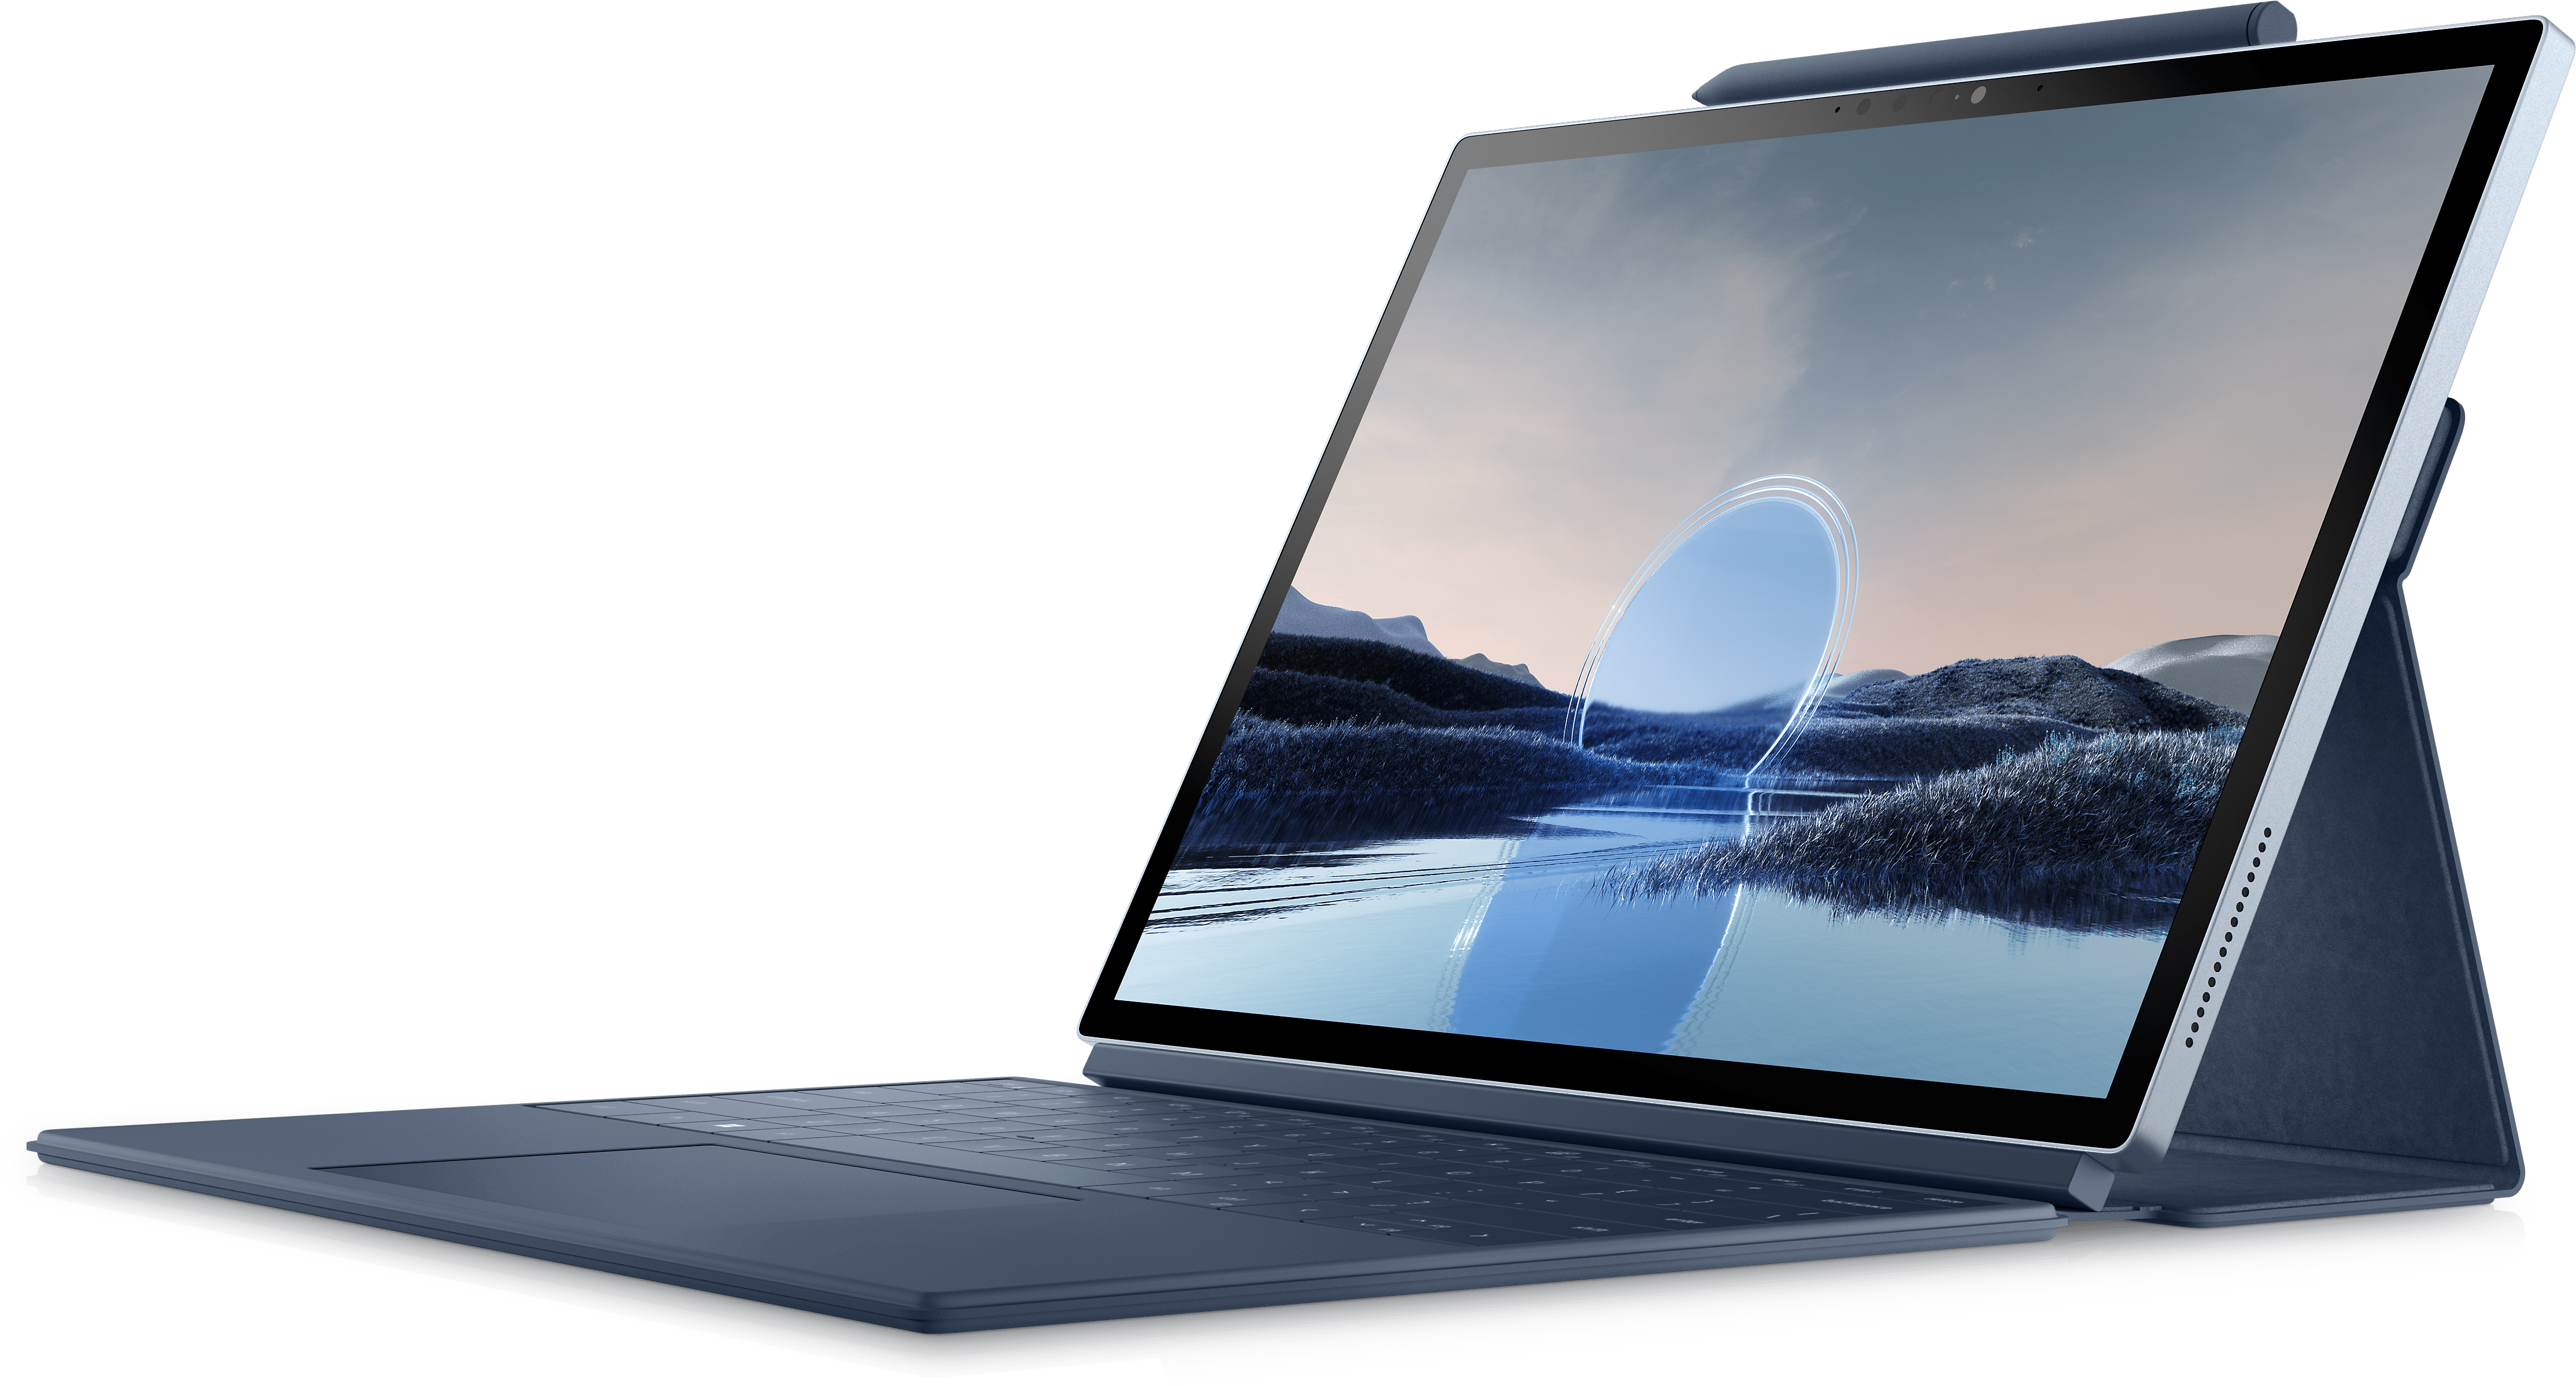 Dell XPS 13 2-in-1 (Image: Dell)